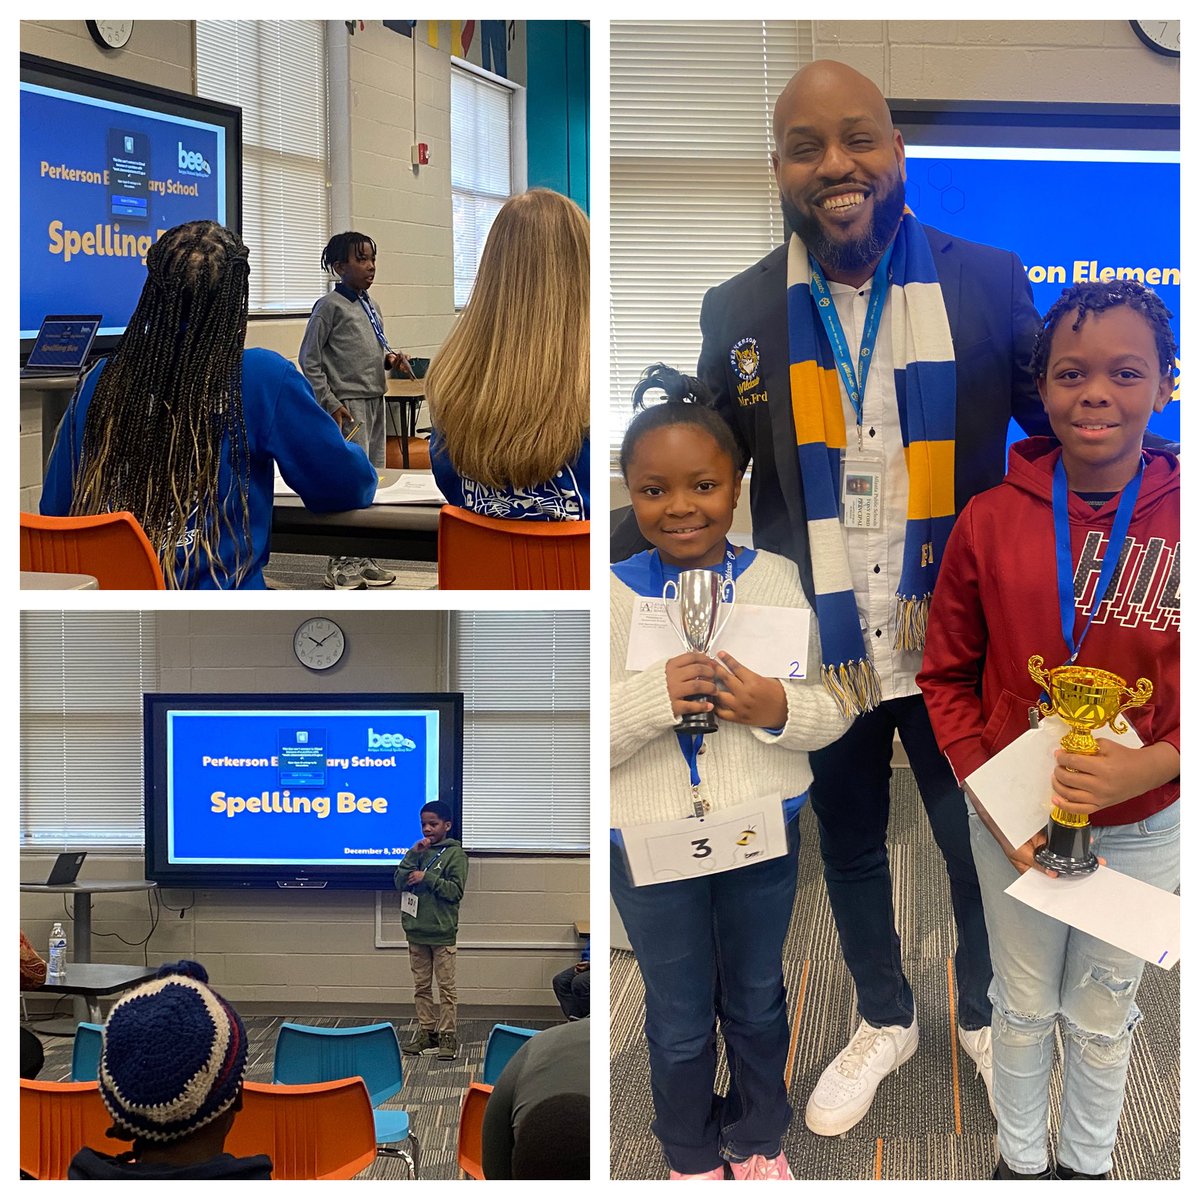 🐝📚 Exciting last Friday at Perkerson Elementary! Our brilliant spellers buzzed their way through tough words at the annual spelling bee 🐝📚 Drumroll, please... 🥁 Congratulations to Joshua Reed for spelling his way to victory! 🏆👏🎉 #PESWildcat @principaltford @apsupdate